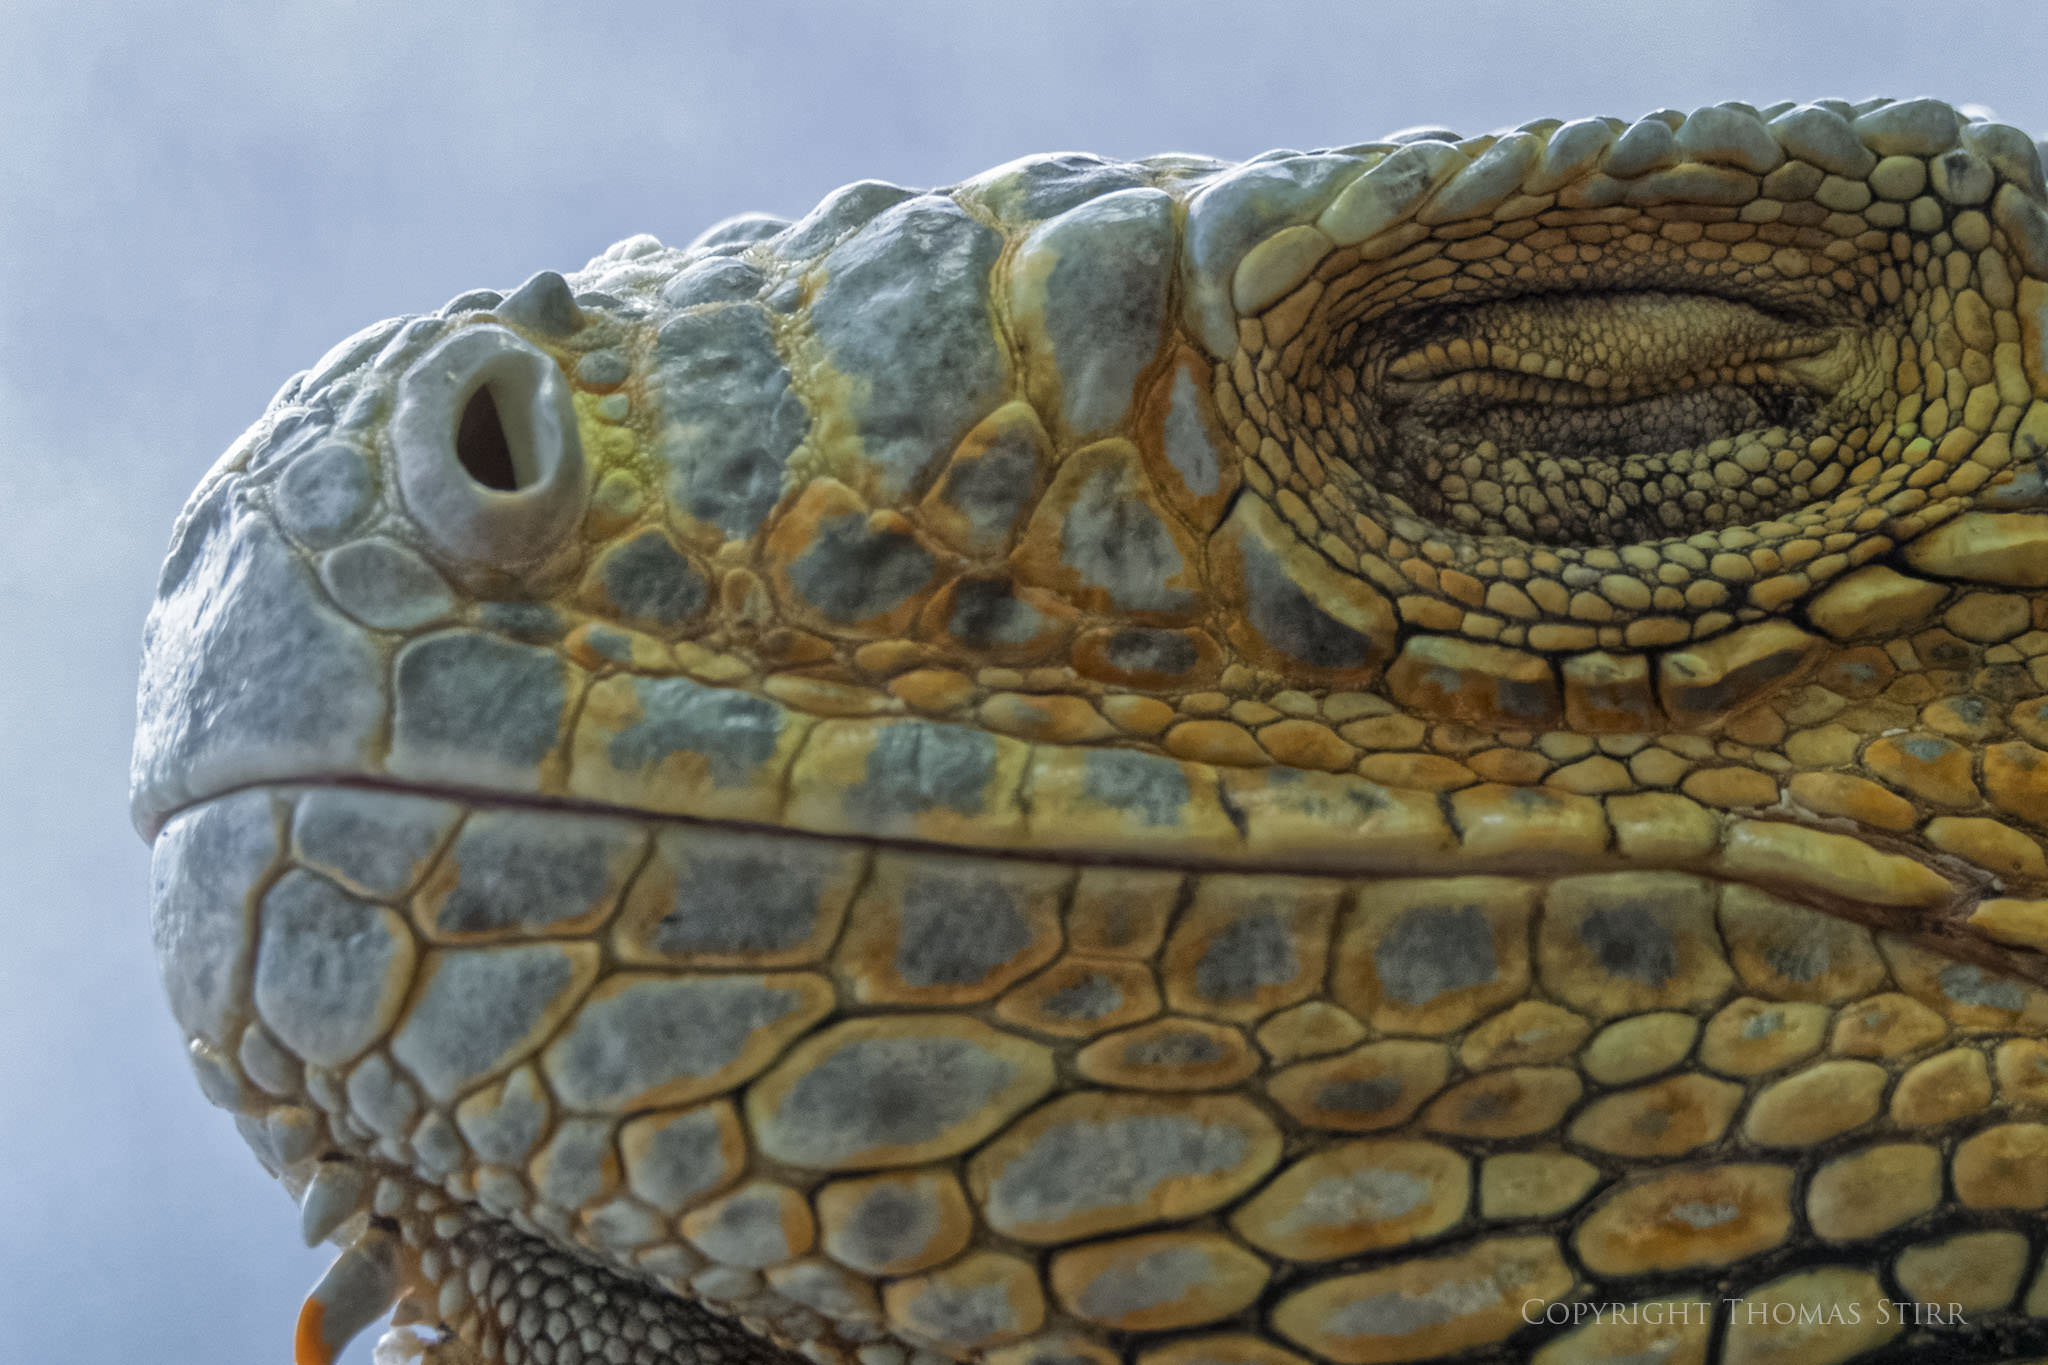 Photographing Captive Reptiles - Photography Life